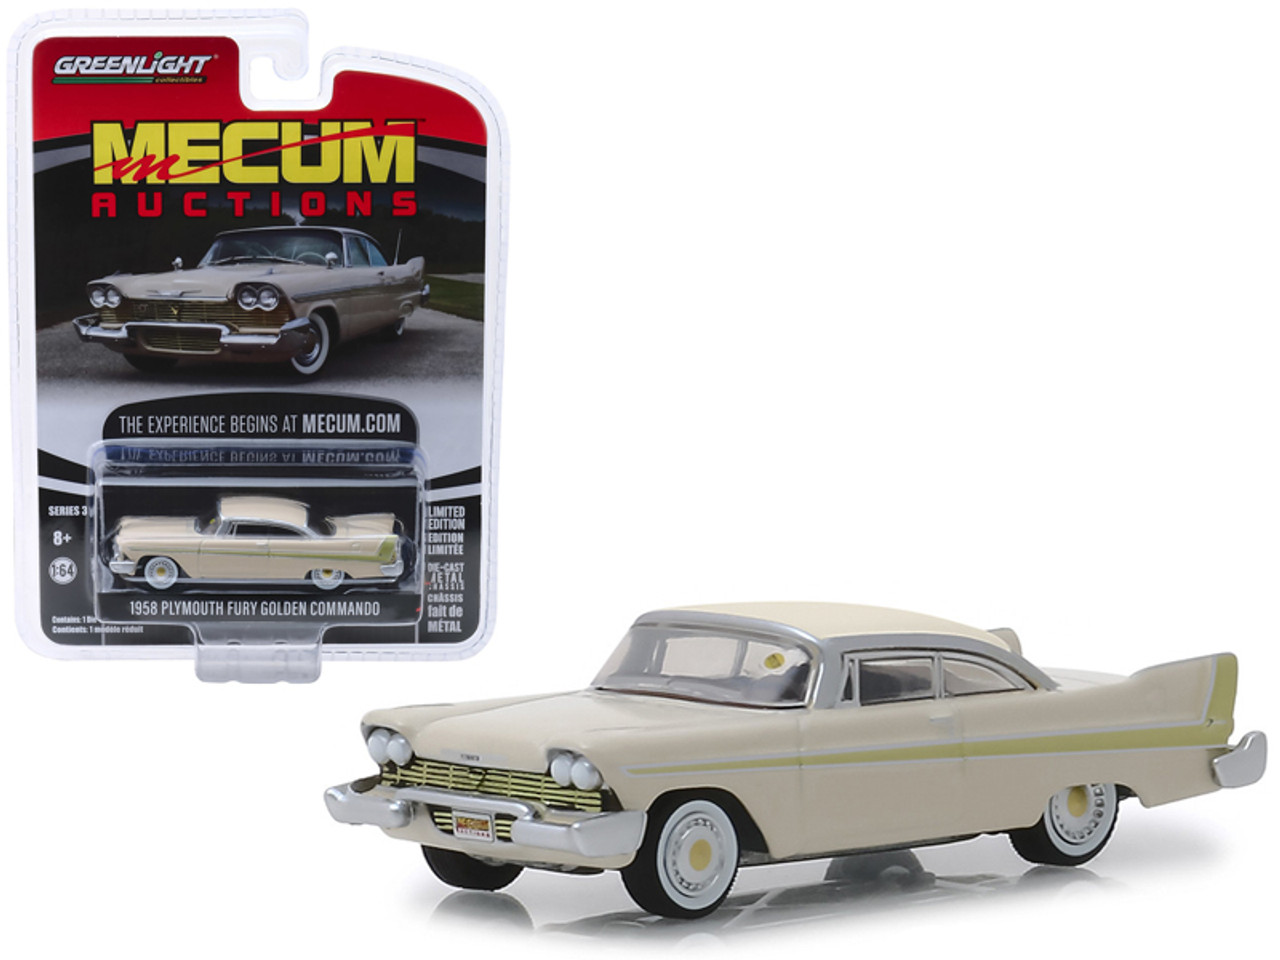 1958 Plymouth Fury Golden Commando Beige (Kissimmee 2012) "Mecum Auctions Collector Cars" Series 3 1/64 Diecast Model Car by Greenlight